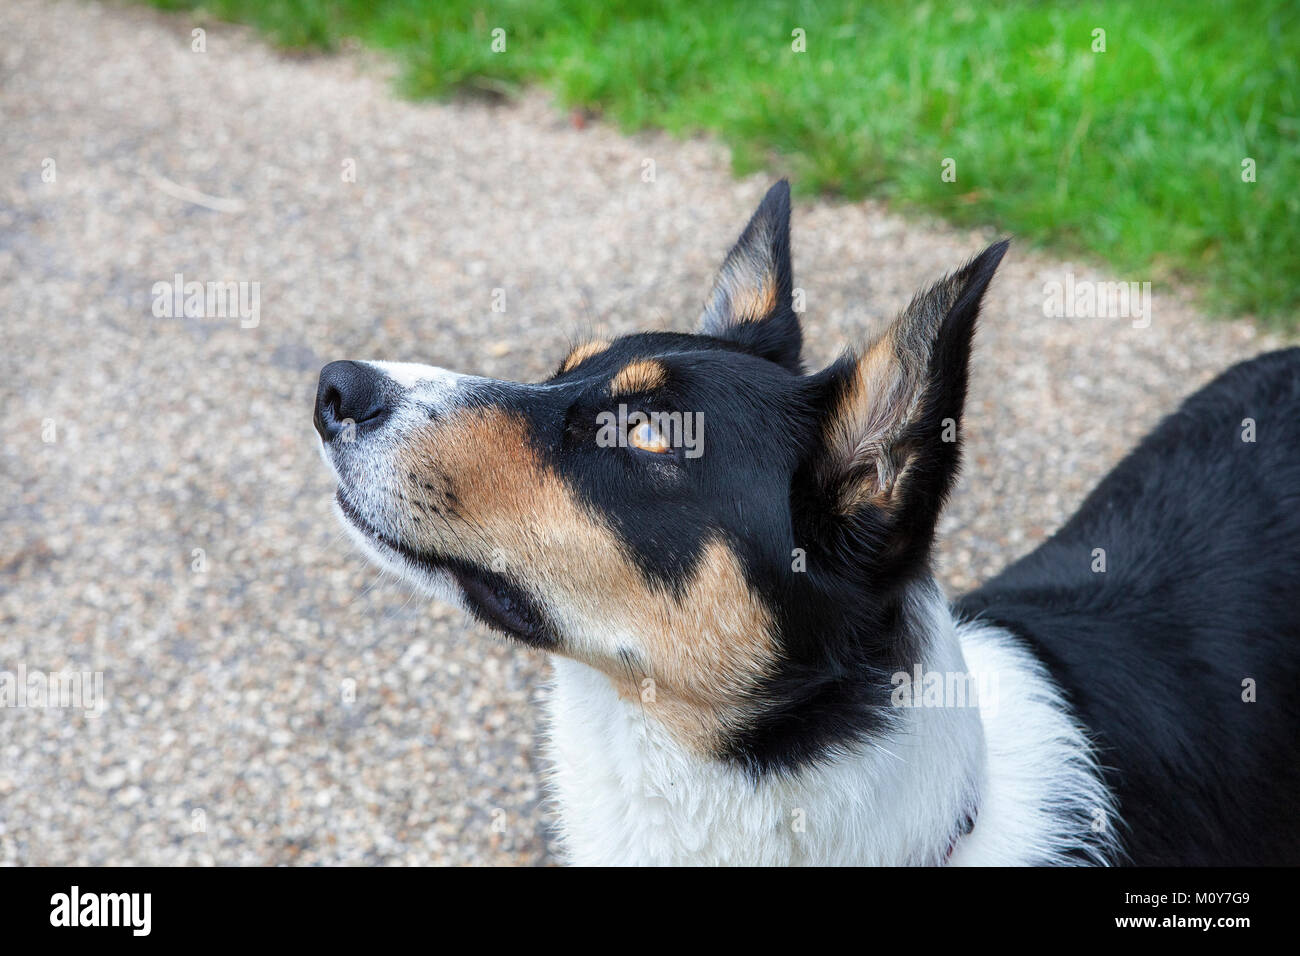 Collie dog looking up with ears pricked Stock Photo